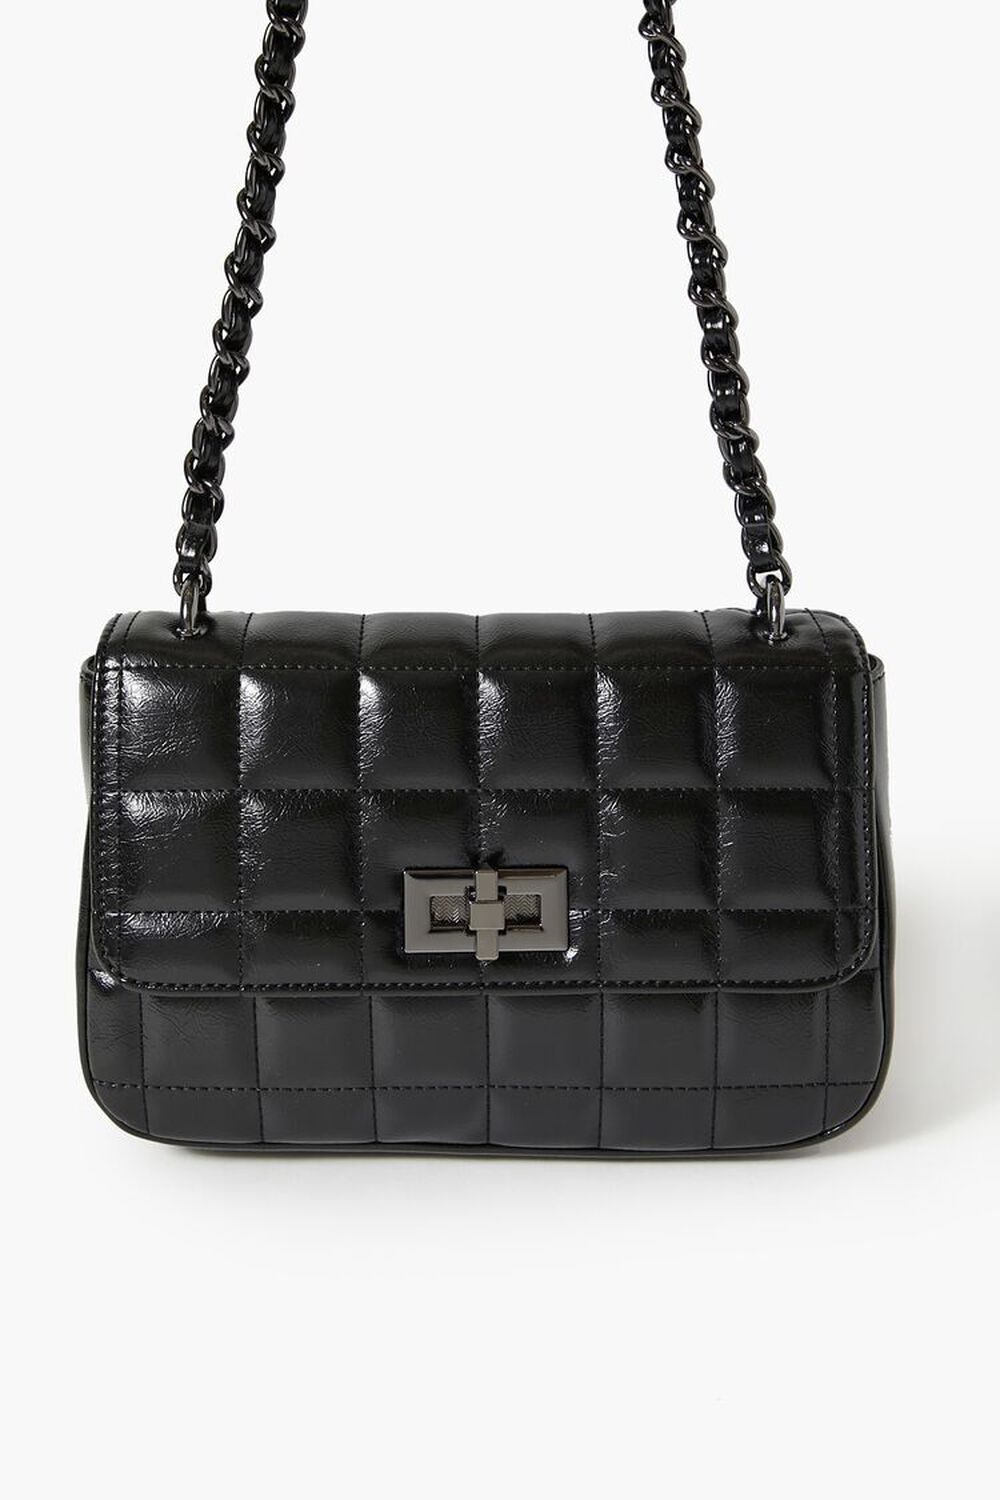 chanel black deauville tote large